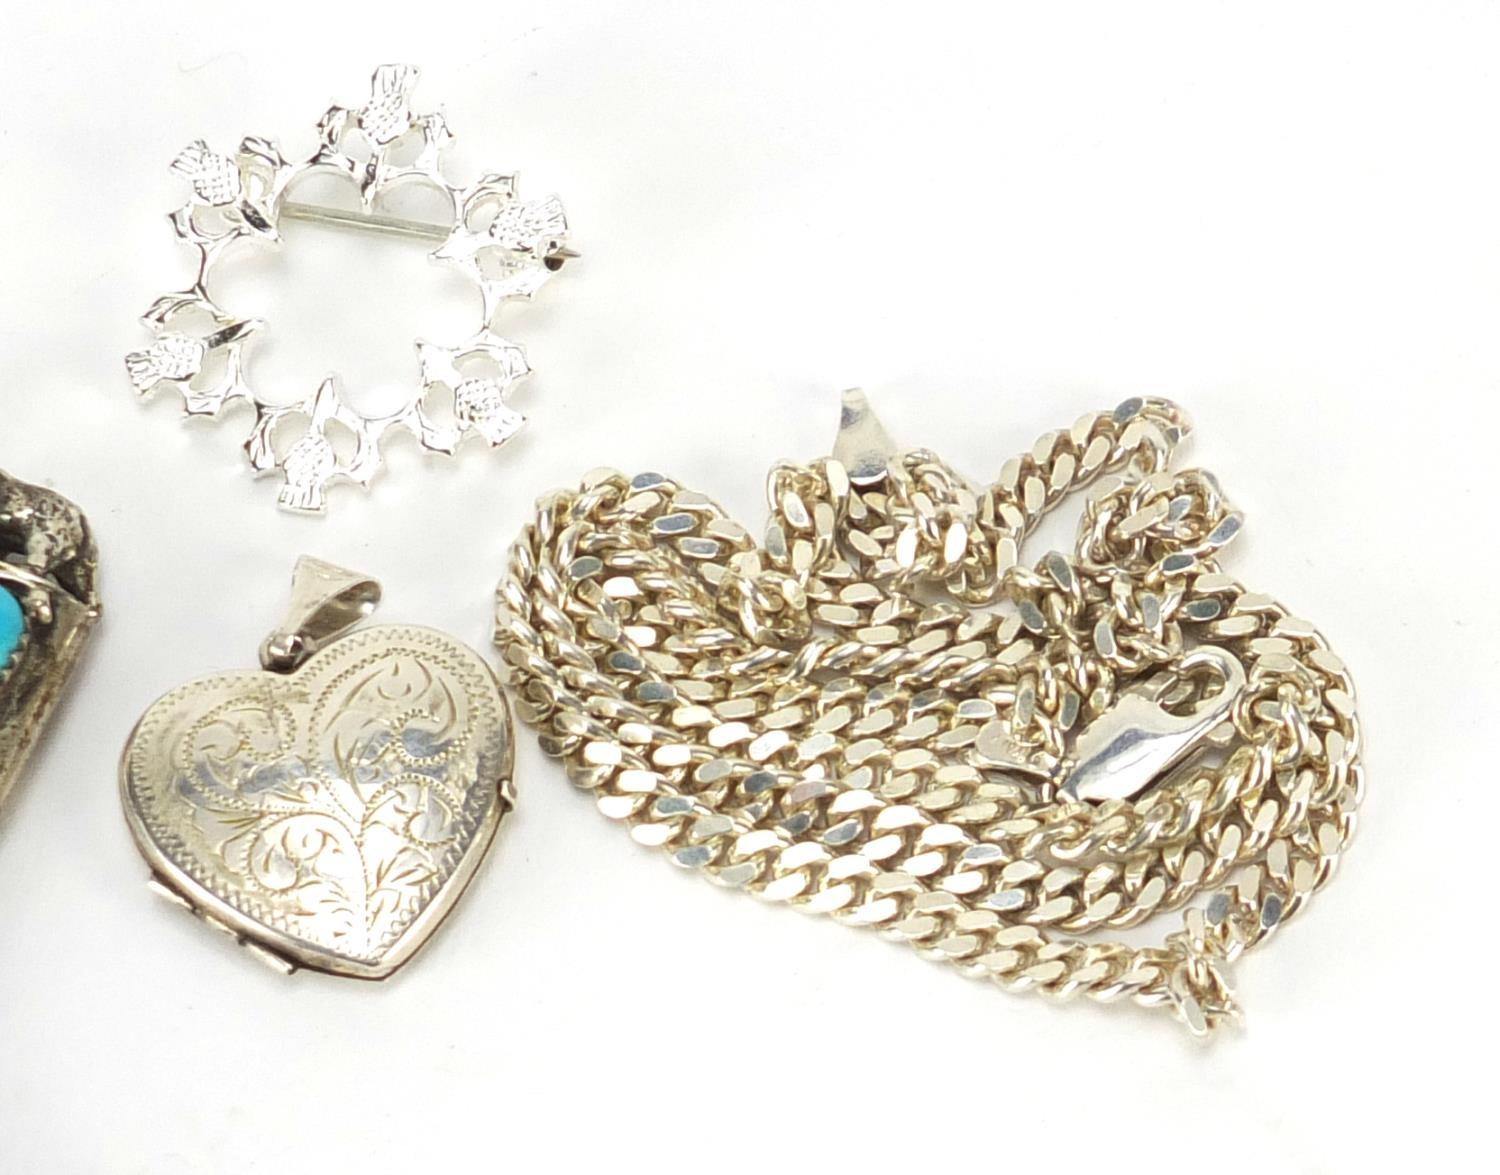 Mostly silver jewellery including a bear claw pendant and love heart locket, 43.0g : For Further - Image 3 of 3